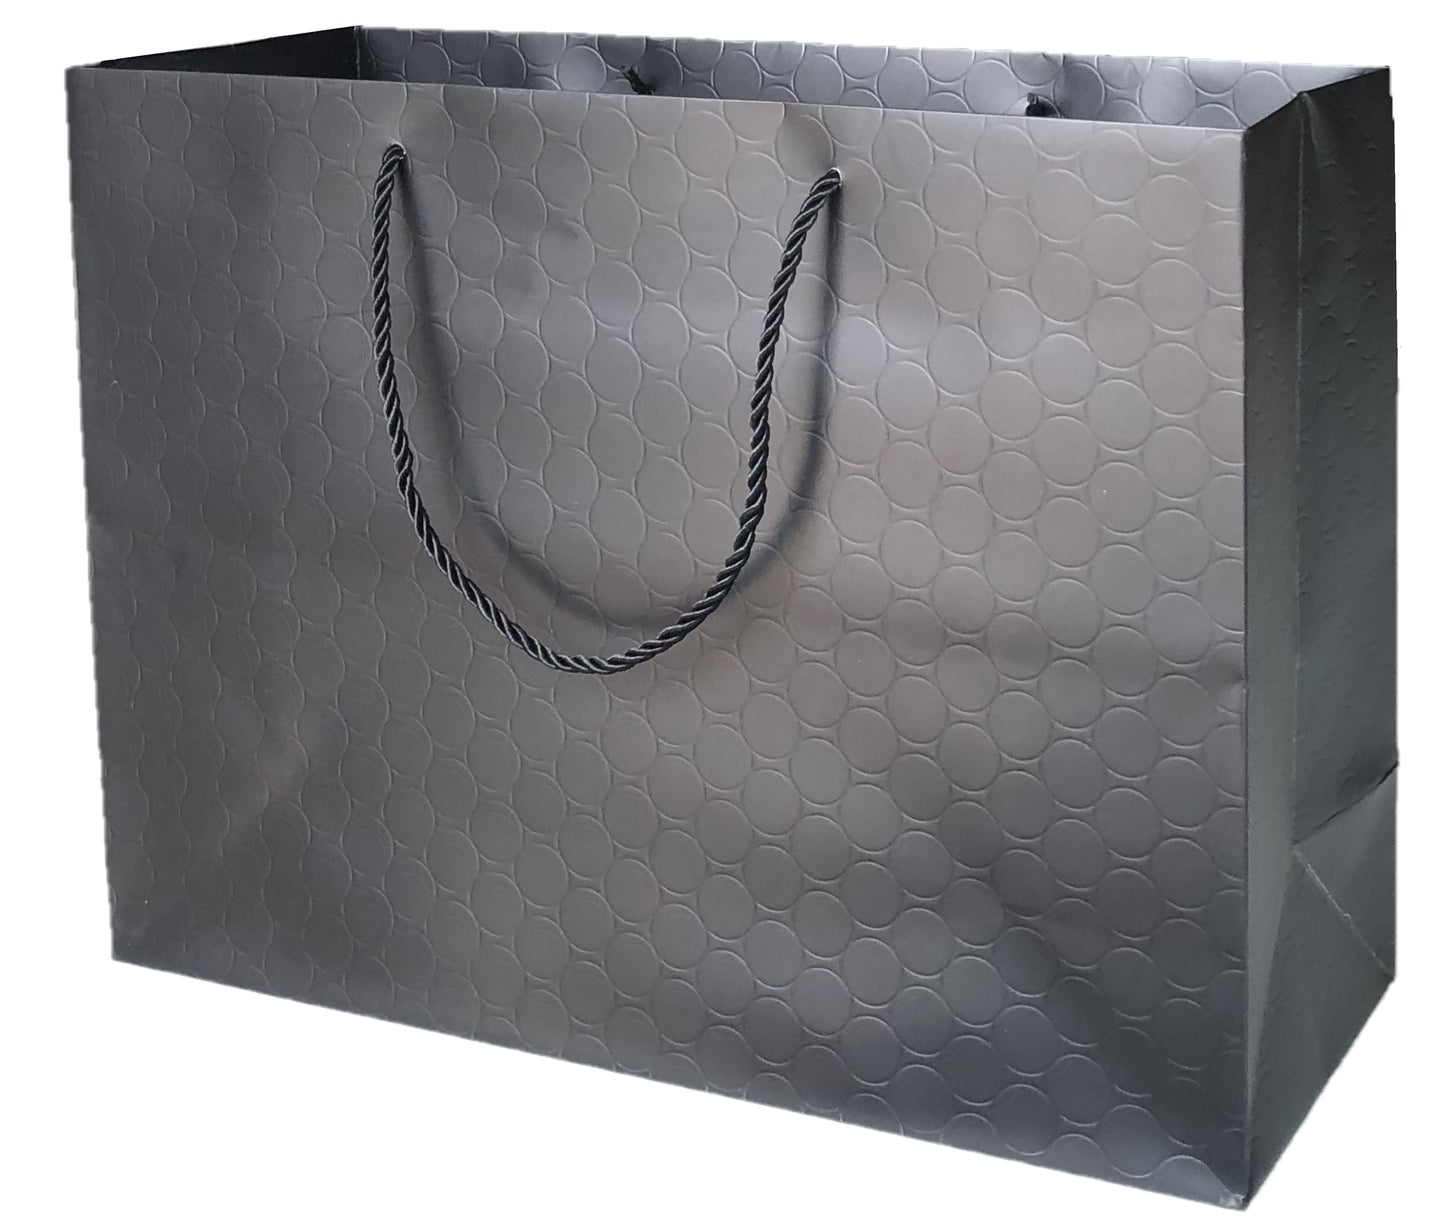 Extra Large Gift Bags 16x6x12 inches Extra Large Black Gift Bags Luxury XL 16x6x12 Black Wedding Bag Matte Extra Large Gift Bag with handles 16x12 Big Size XL Black Paper Shopping Bags Modern Fancy Elegant For Presents Gifts Business